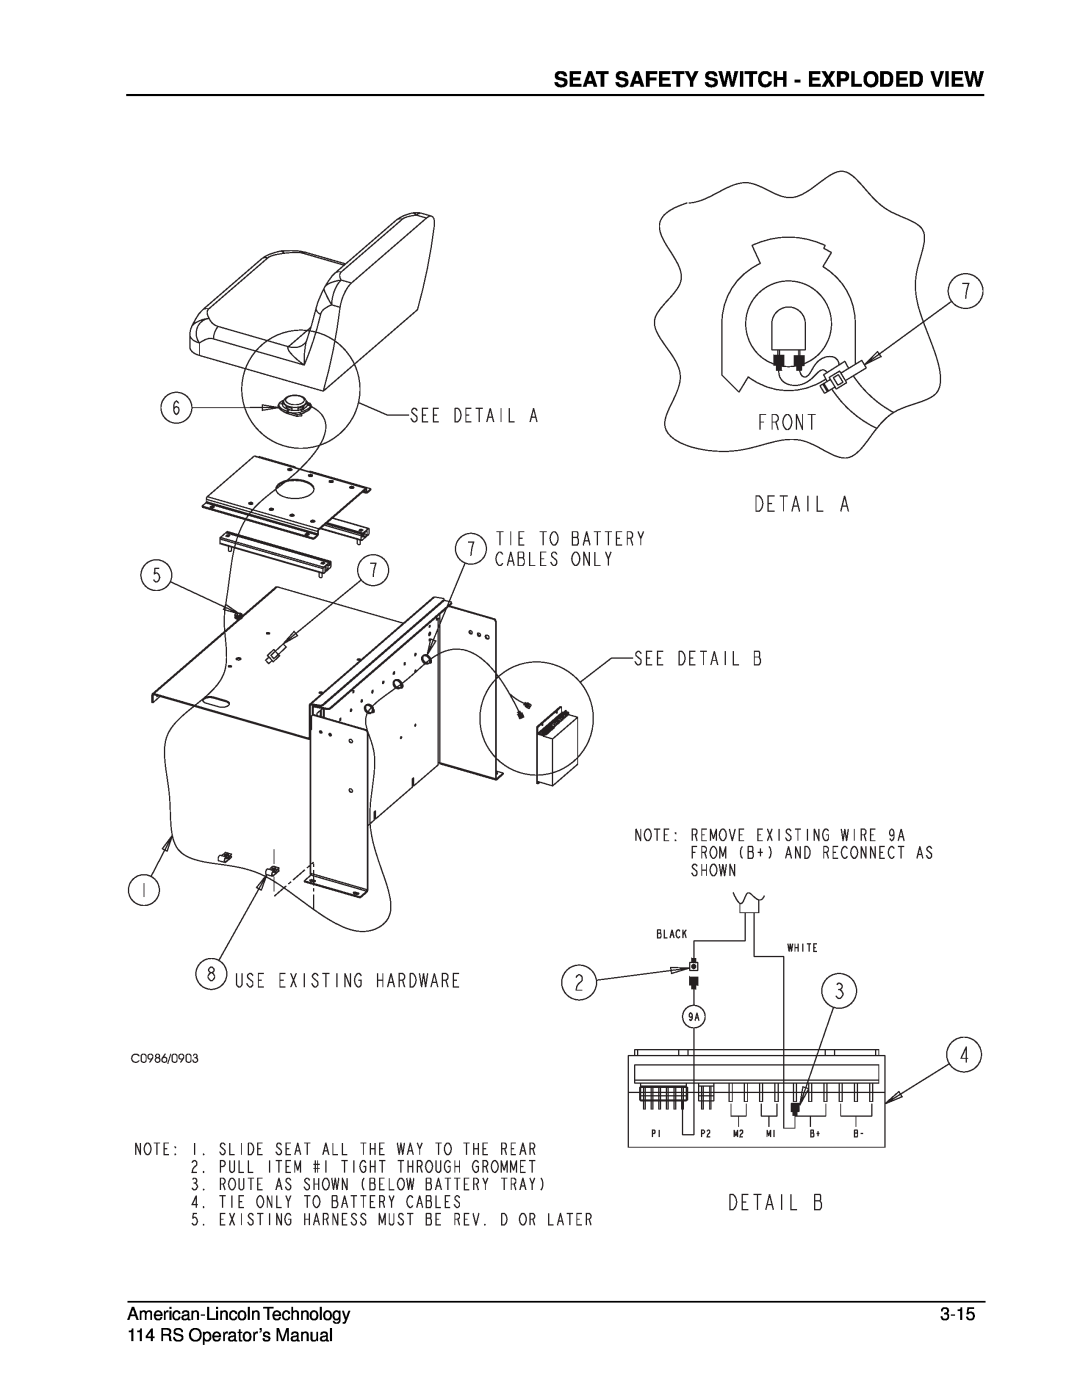 Nilfisk-ALTO 114RS SWEEPER Seat Safety Switch - Exploded View, American-LincolnTechnology, 3-15, RS Operator’s Manual 